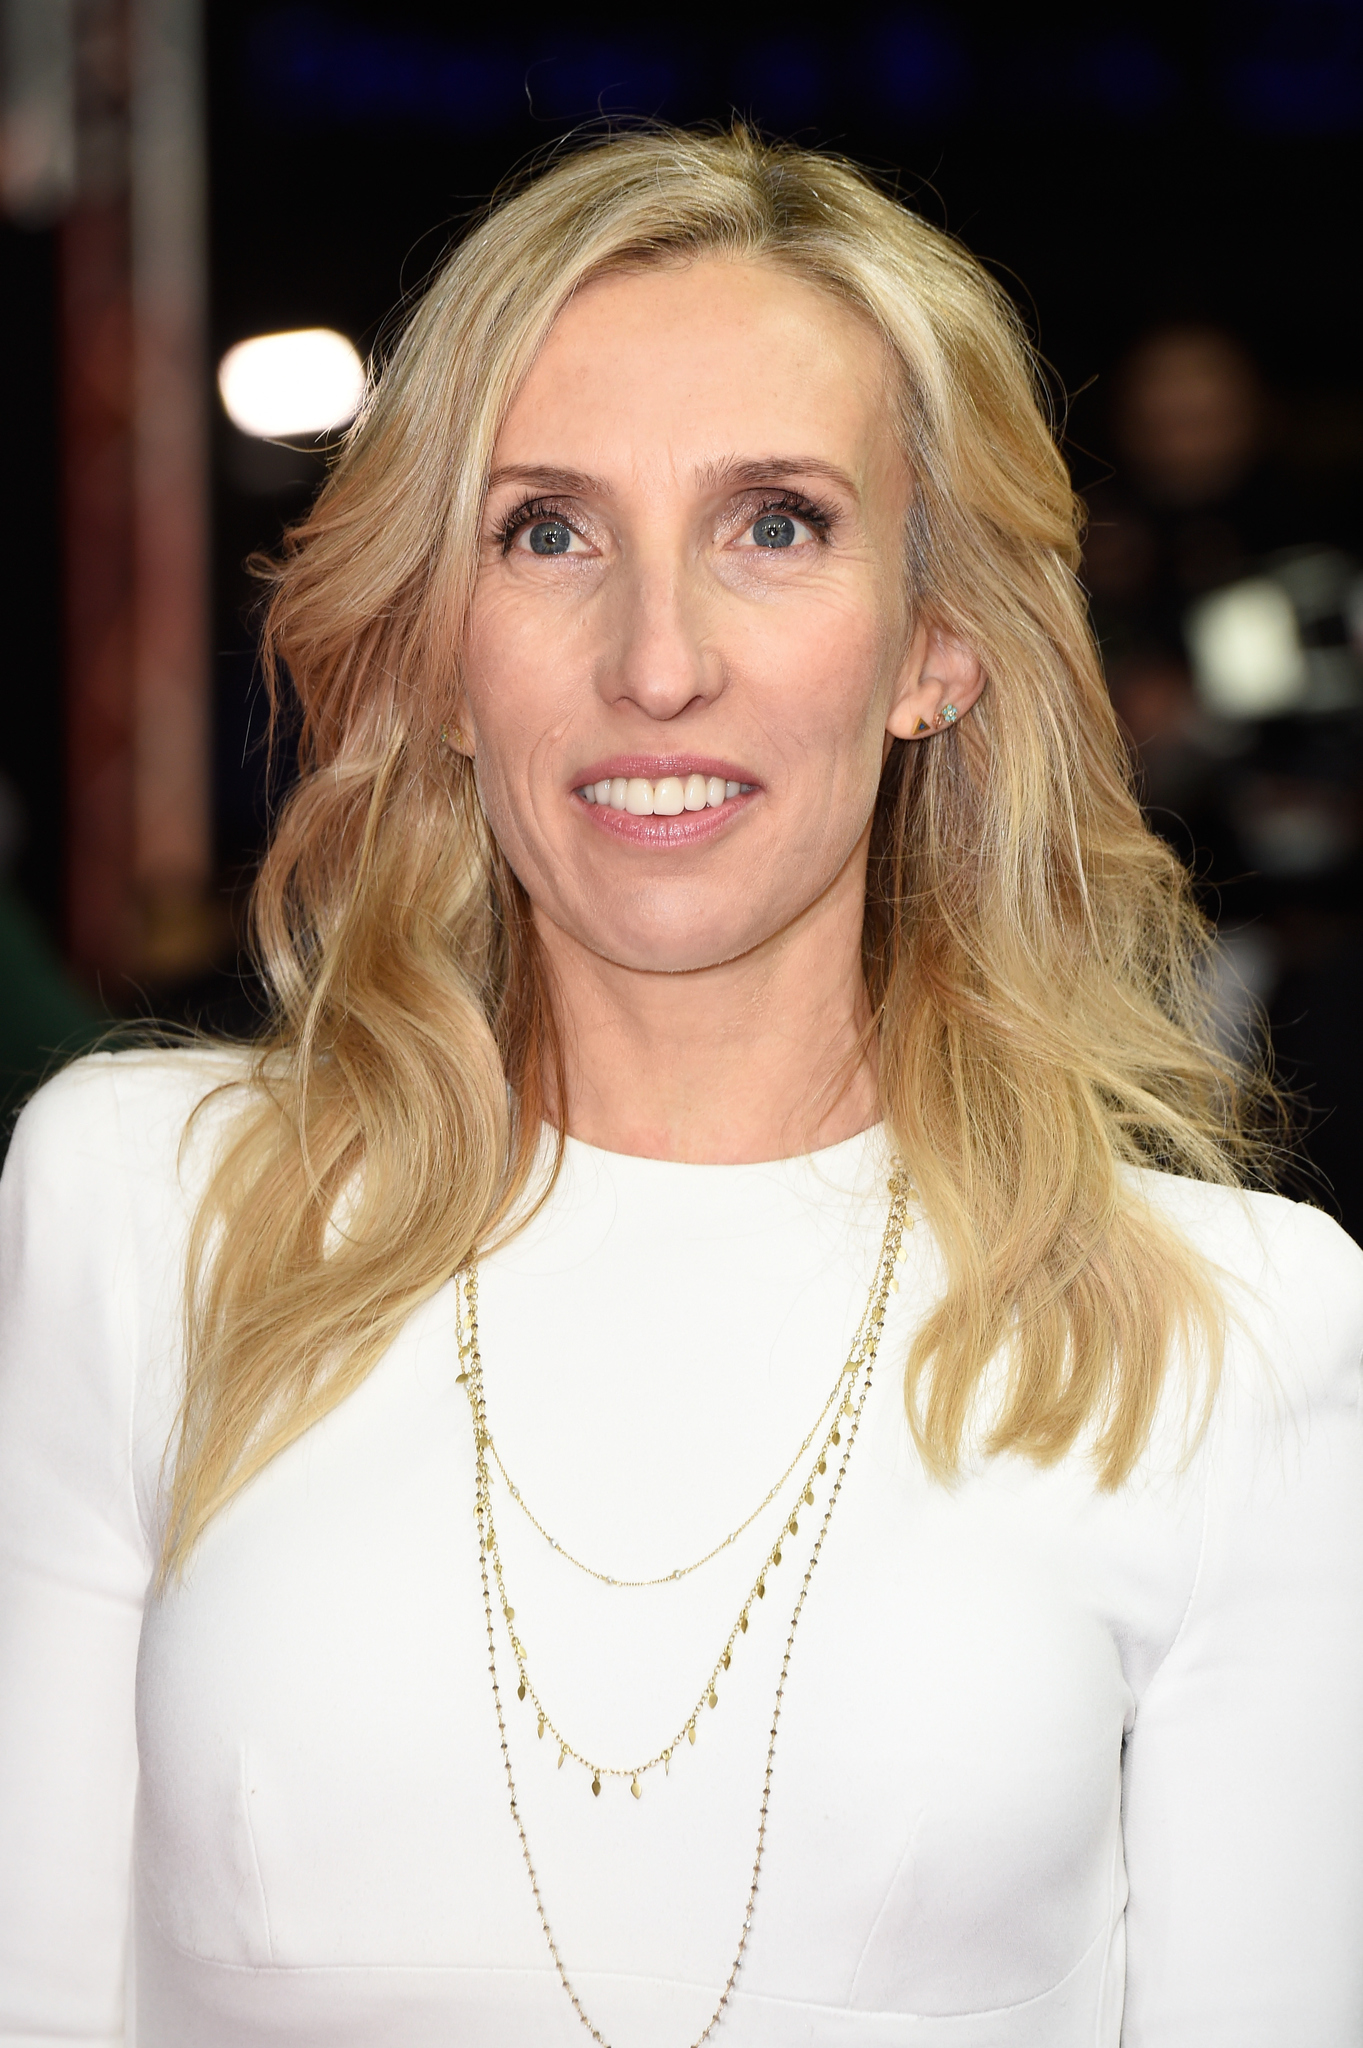 Sam Taylor-Johnson in a white outfit